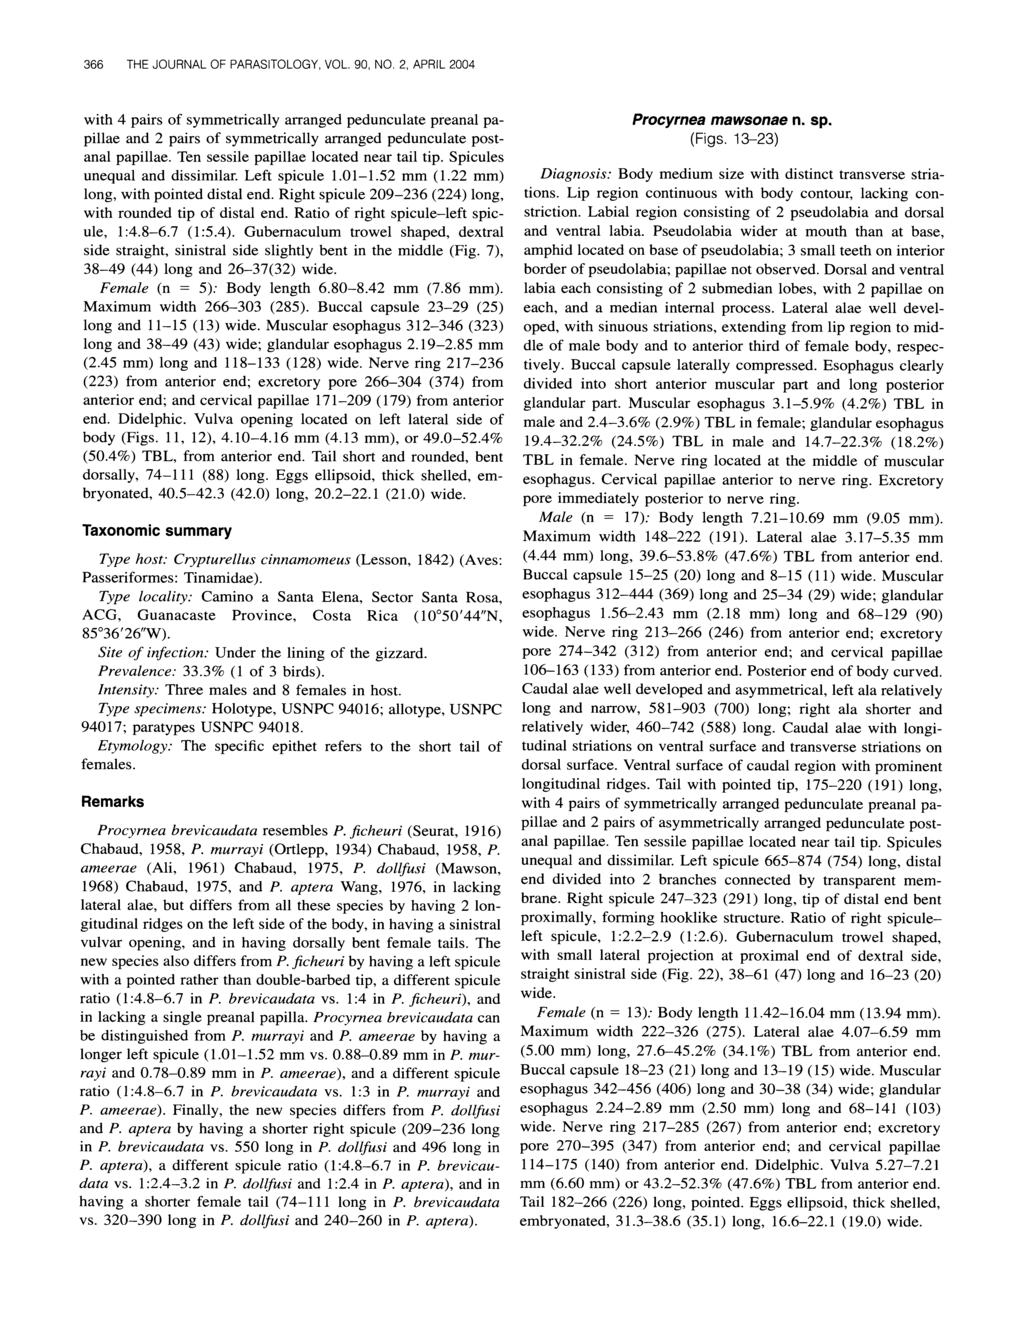 366 THE JOURNAL OF PARASITOLOGY, VOL. 90, NO. 2, APRIL 2004 with 4 pairs of symmetrically arranged pedunculate preanal papillae and 2 pairs of symmetrically arranged pedunculate postanal papillae.